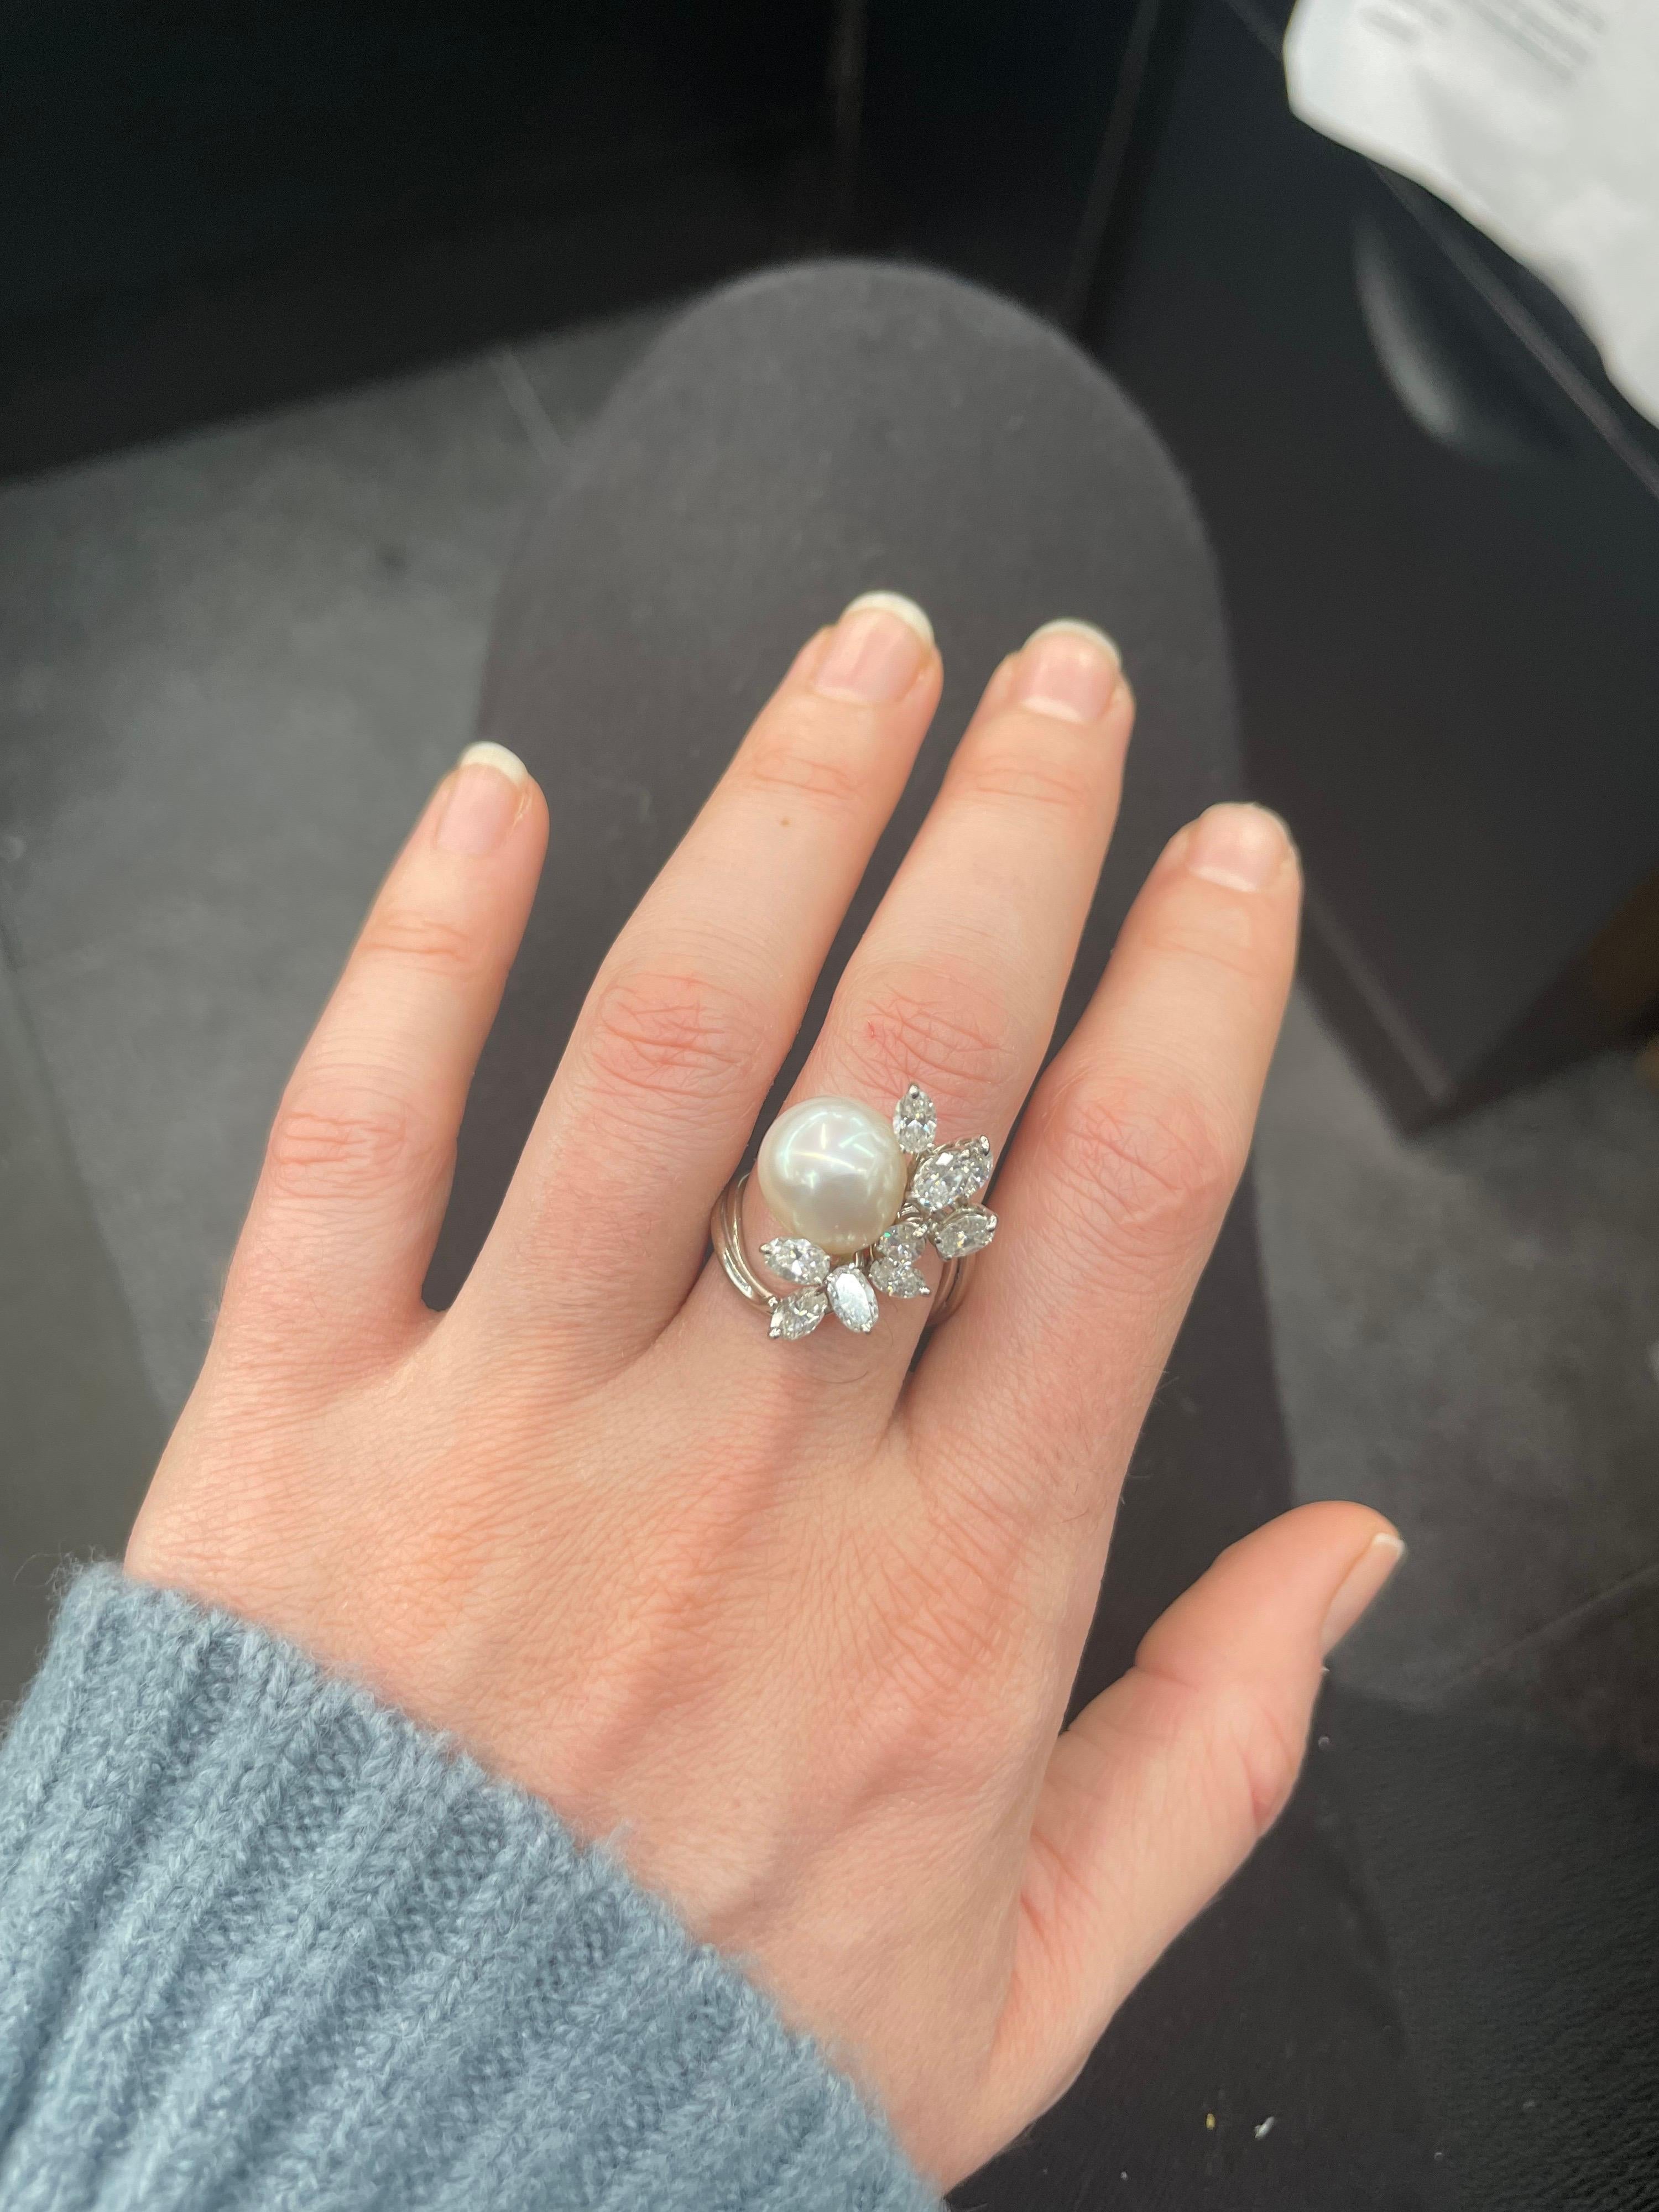 14 Karat White Gold cocktail ring featuring one Australian South Sea Pearl measuring 11-11.5 mm flanked with 9 oval diamonds weighing approximately 2 carats. 
Gem South Sea Pearl! 